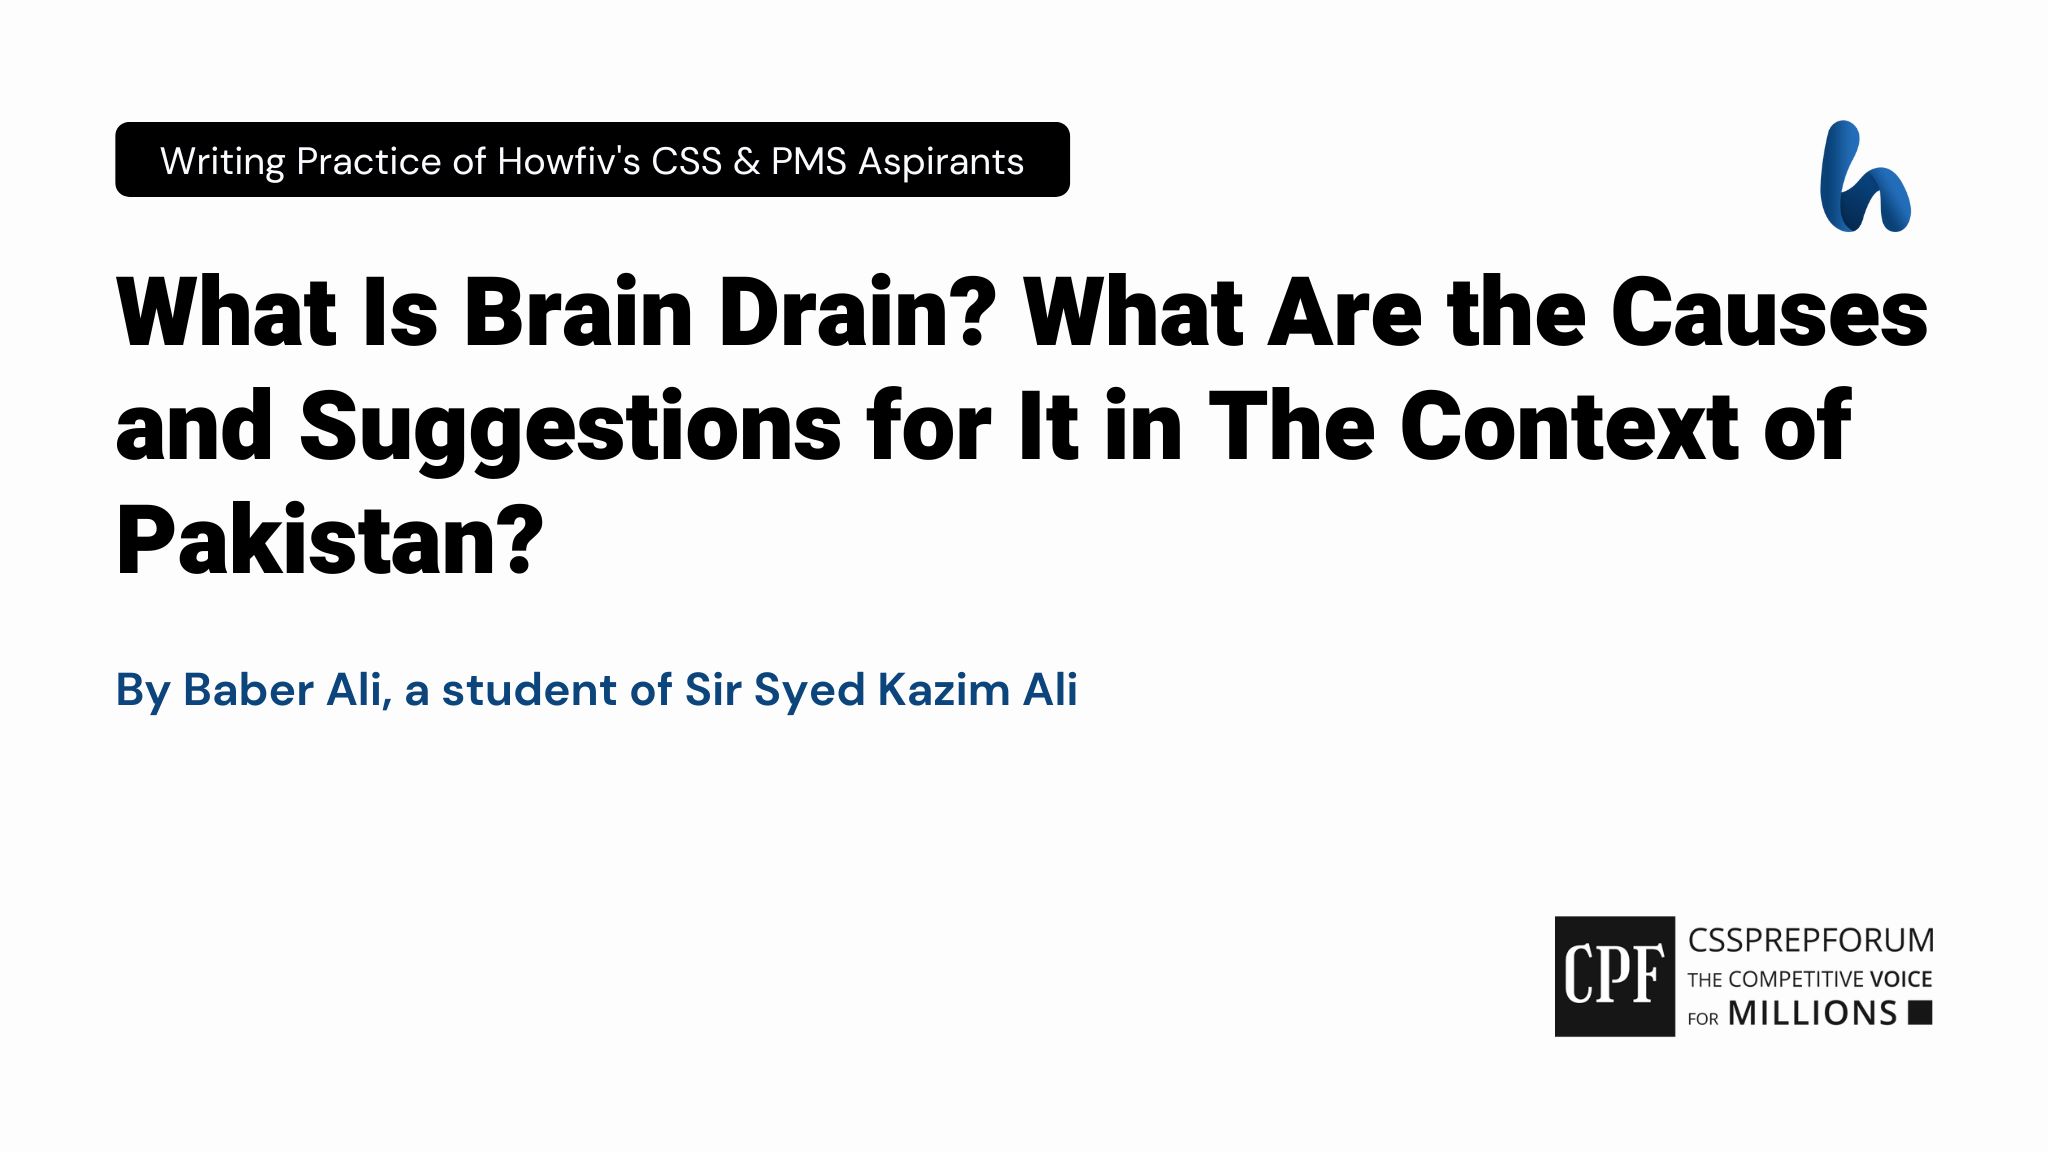 What Is Brain Drain? What Are the Causes and Suggestions for It in The Context of Pakistan?